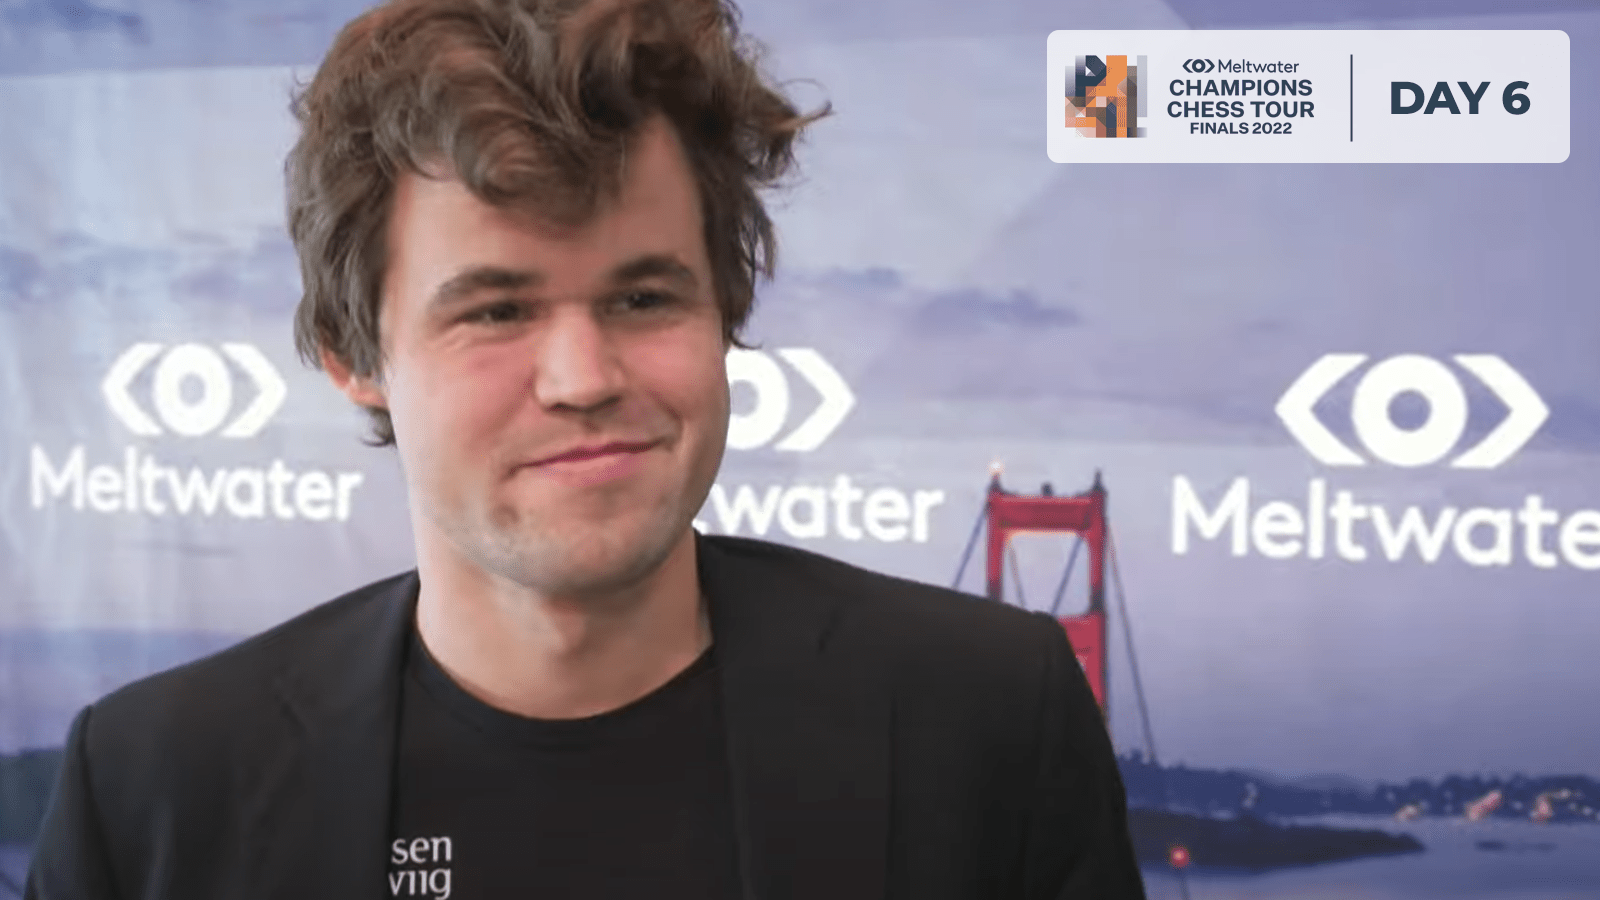 Carlsen Wins Champions Chess Tour Finals With Round To
Spare